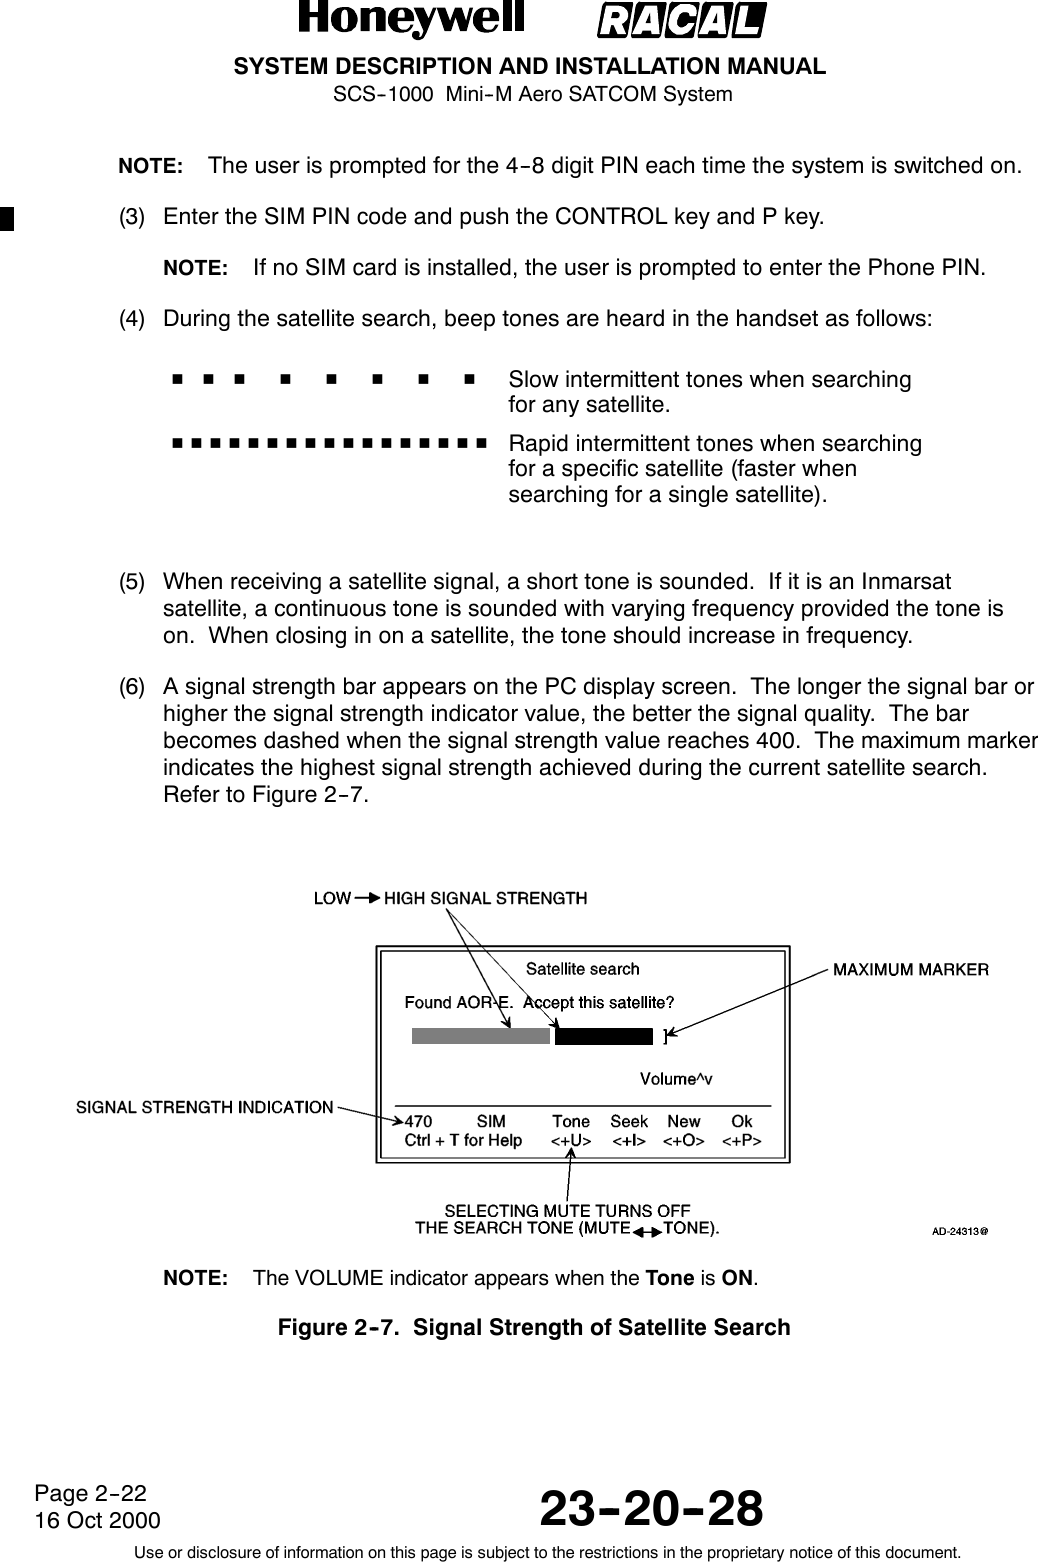 SYSTEM DESCRIPTION AND INSTALLATION MANUALSCS--1000 Mini--M Aero SATCOM System23--20--28Use or disclosure of information on this page is subject to the restrictions in the proprietary notice of this document.Page 2--2216 Oct 2000NOTE: The user is prompted for the 4--8 digit PIN each time the system is switched on.(3) Enter the SIM PIN code and push the CONTROL key and P key.NOTE: If no SIM card is installed, the user is prompted to enter the Phone PIN.(4) During the satellite search, beep tones are heard in the handset as follows:HHHHHHHHSlow intermittent tones when searchingfor any satellite.HHHHHHHHHHHHHHHHH Rapid intermittent tones when searchingfor a specific satellite (faster whensearching for a single satellite).(5) When receiving a satellite signal, a short tone is sounded. If it is an Inmarsatsatellite, a continuous tone is sounded with varying frequency provided the tone ison. When closing in on a satellite, the tone should increase in frequency.(6) A signal strength bar appears on the PC display screen. The longer the signal bar orhigher the signal strength indicator value, the better the signal quality. The barbecomes dashed when the signal strength value reaches 400. The maximum markerindicates the highest signal strength achieved during the current satellite search.Refer to Figure 2--7.NOTE: The VOLUME indicator appears when the Tone is ON.Figure 2--7. Signal Strength of Satellite Search